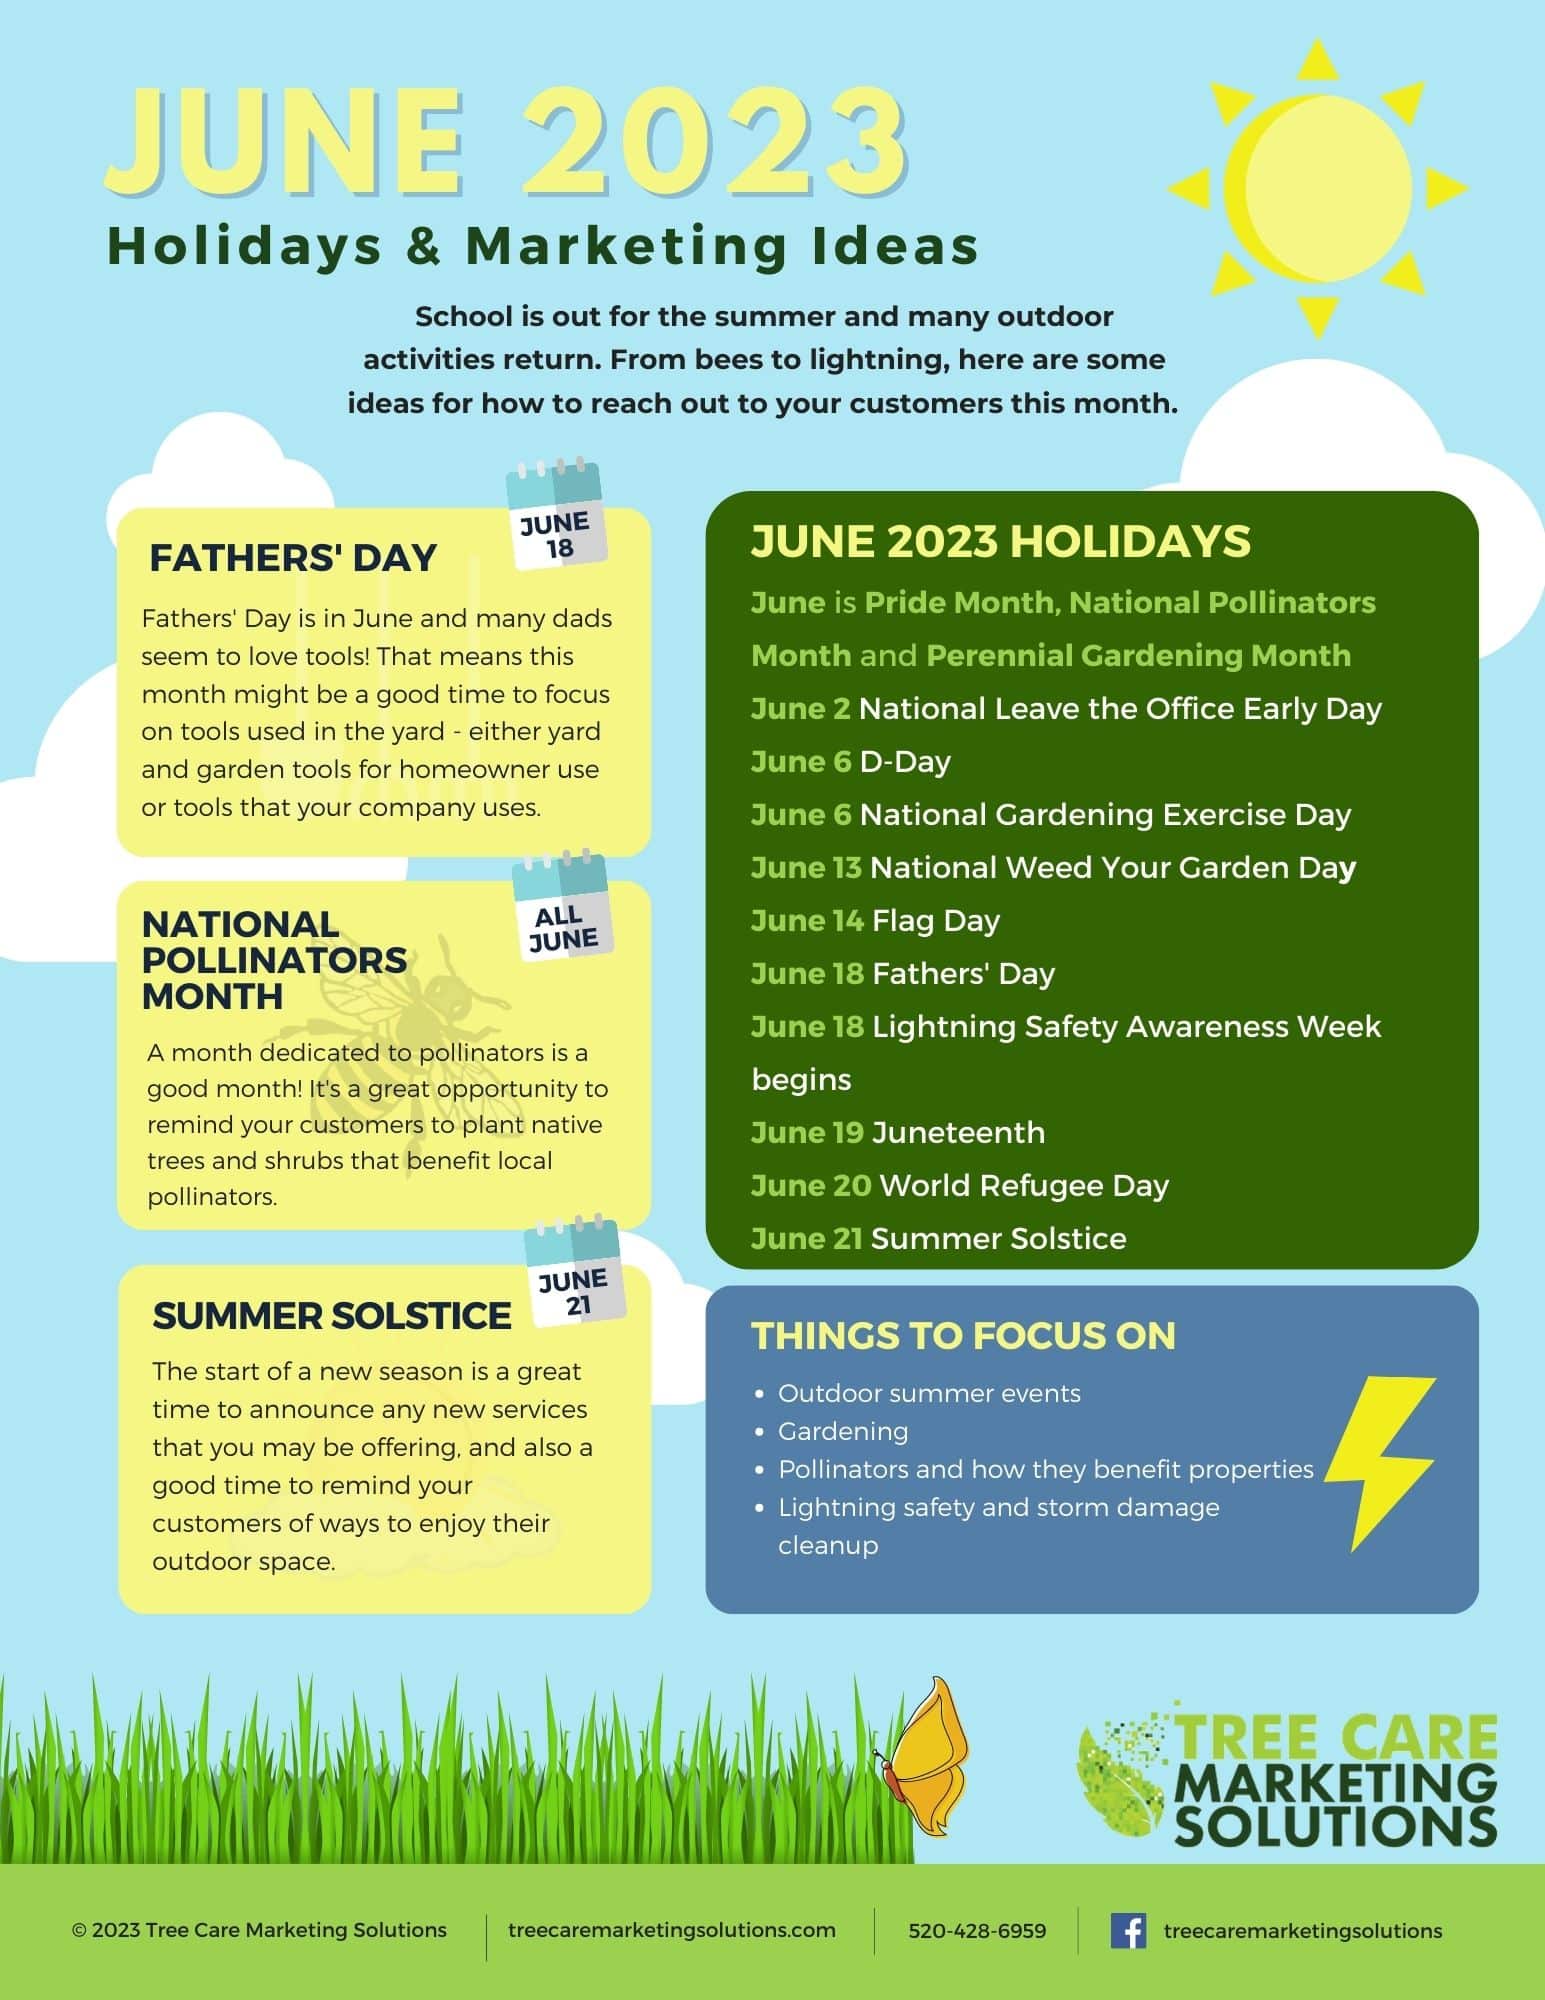 TCMS Monthly Marketing tips for June 2023